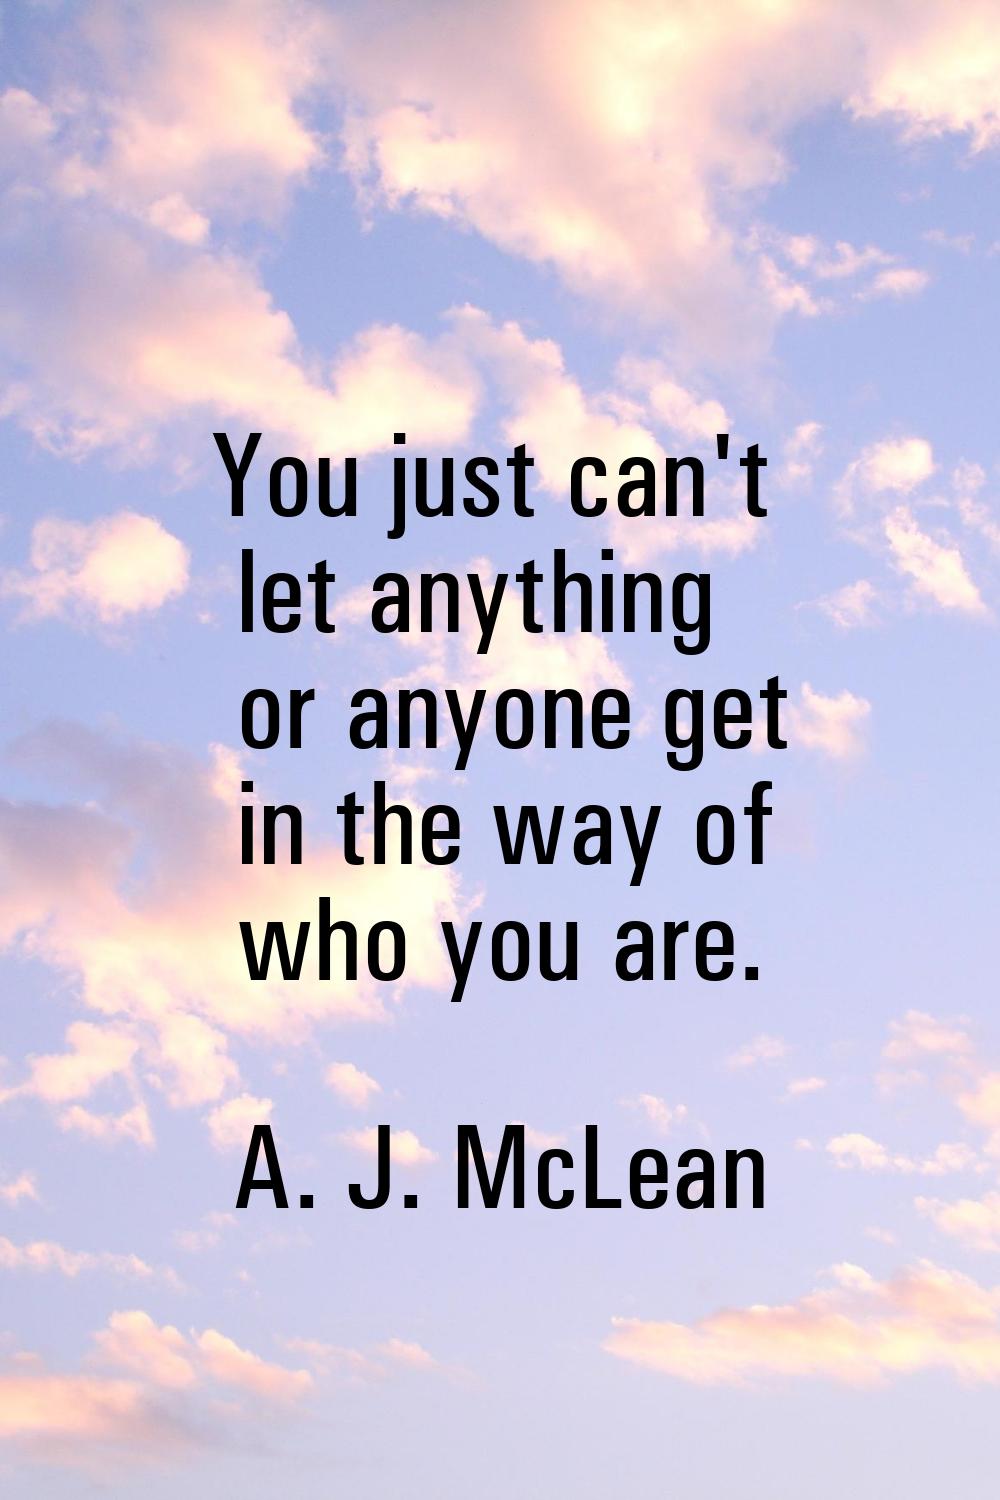 You just can't let anything or anyone get in the way of who you are.